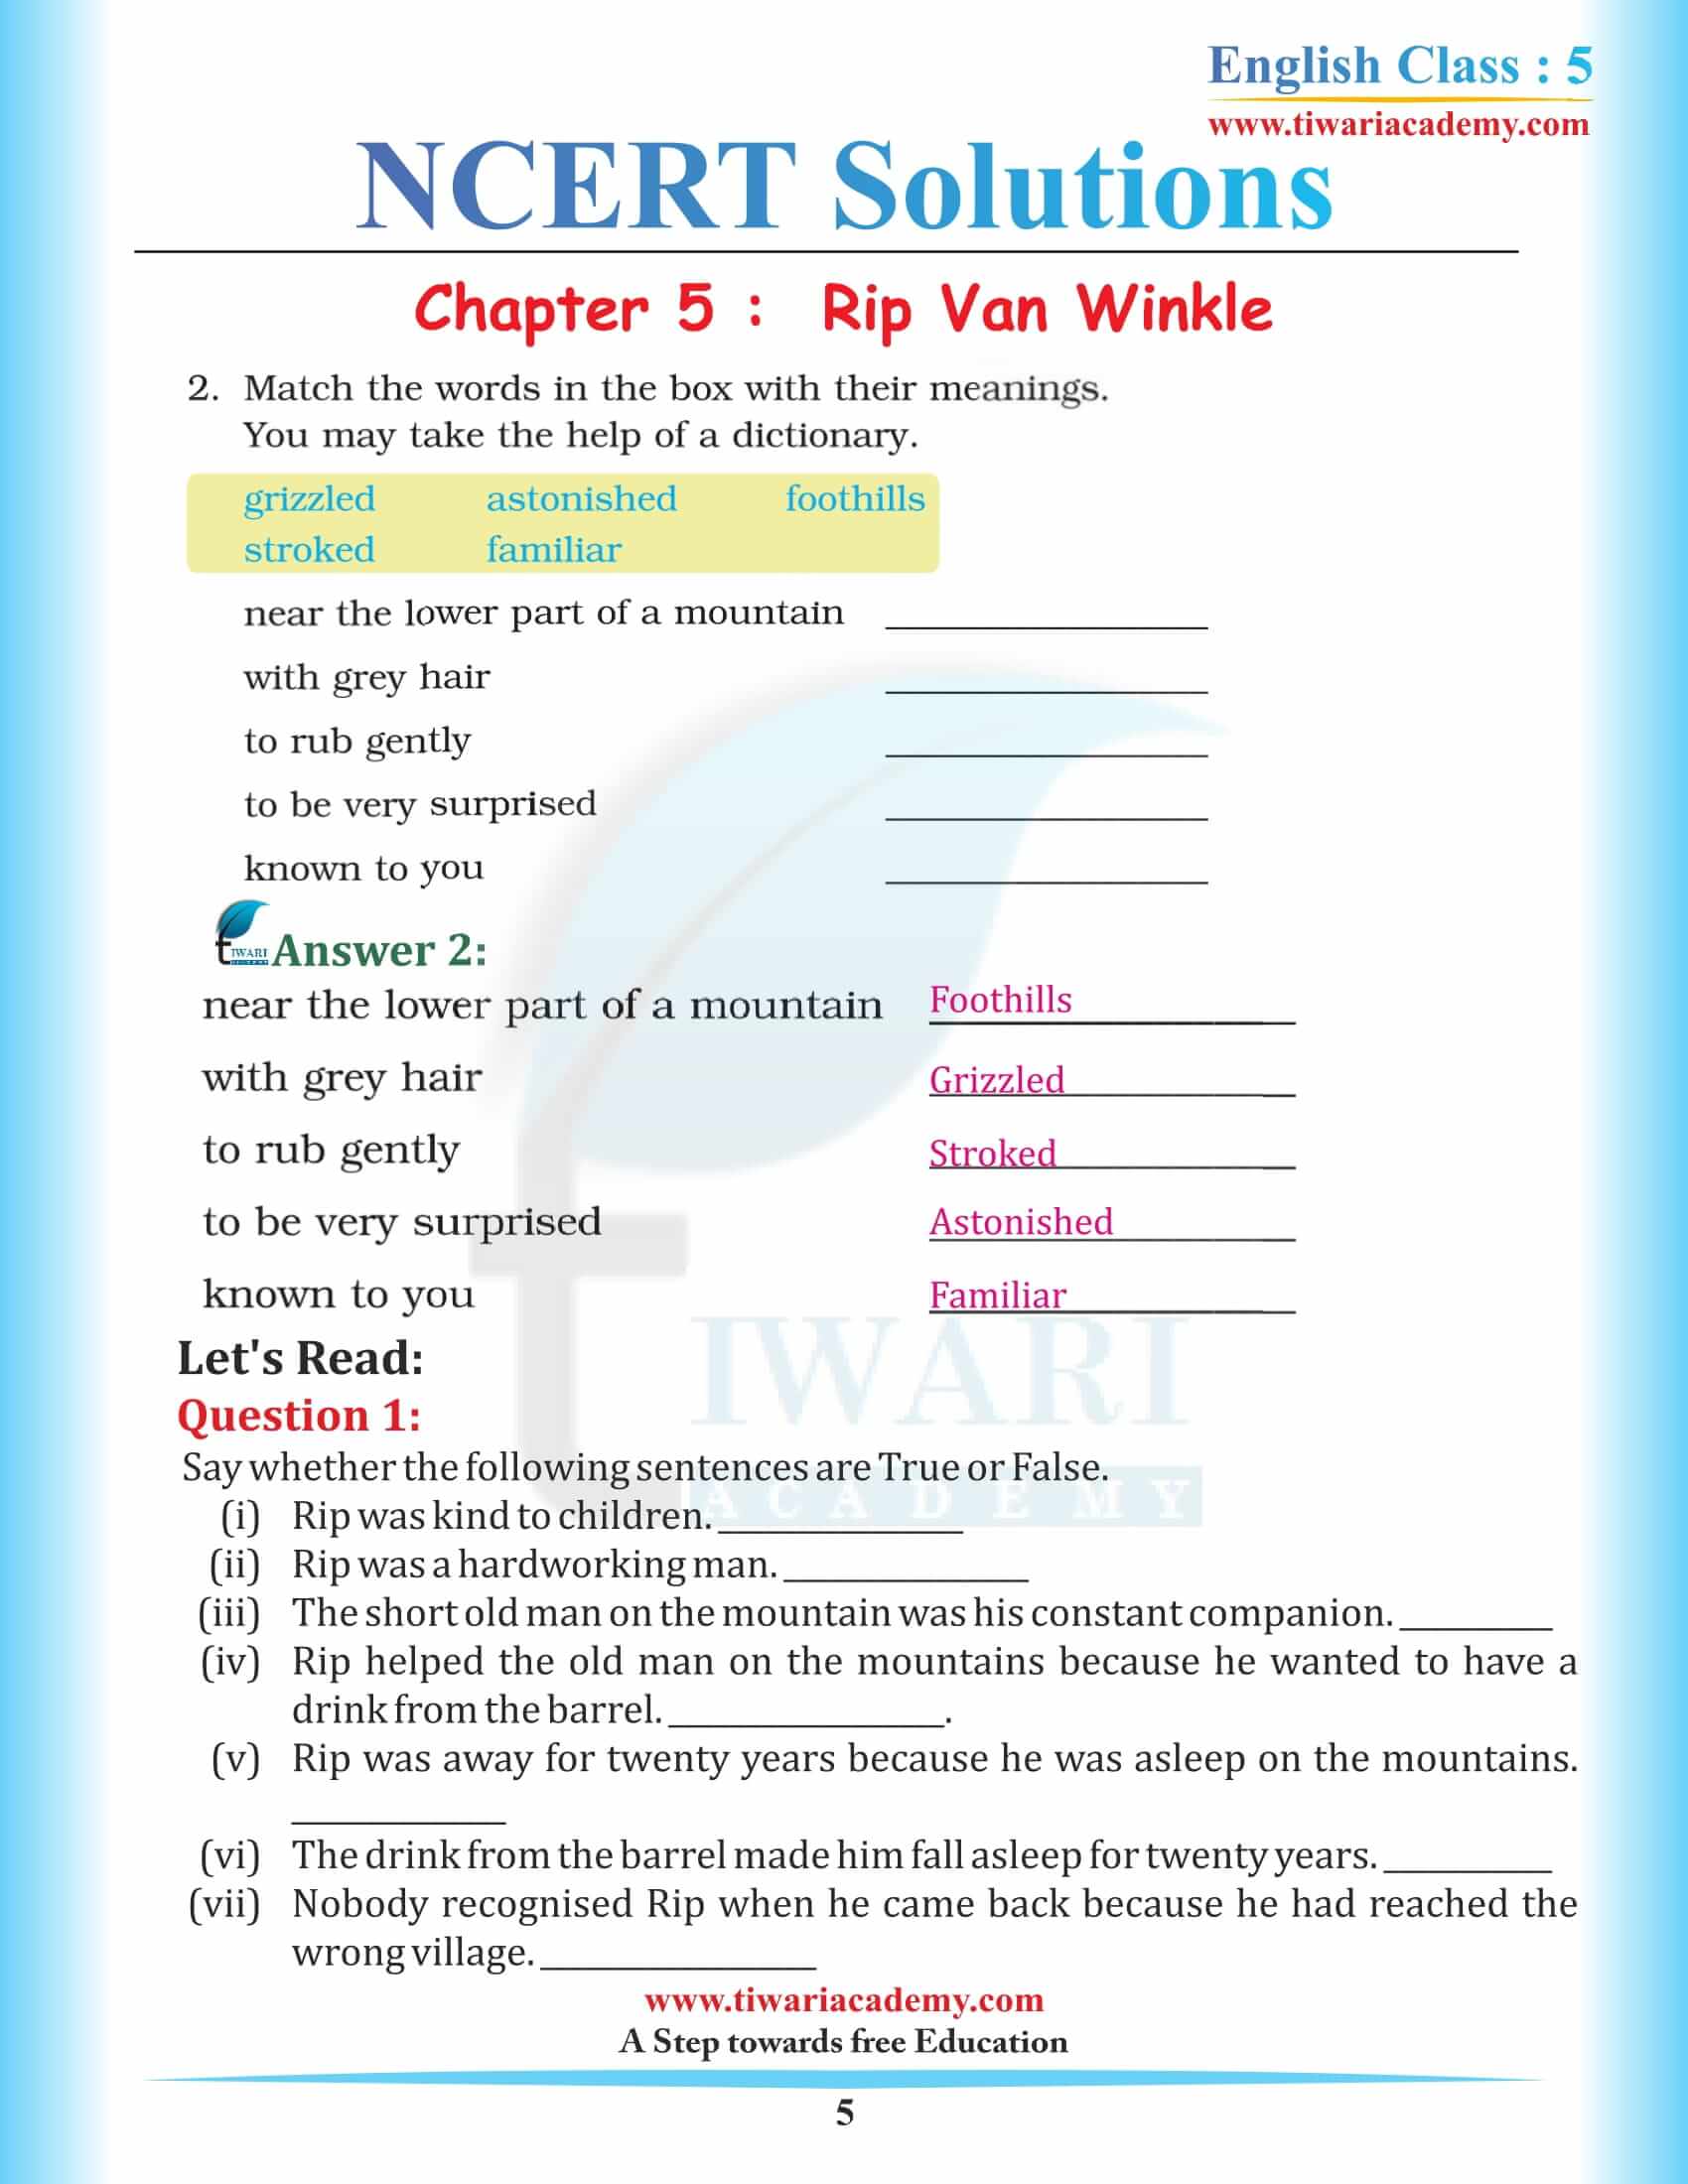 NCERT Solutions for Class 5 English Chapter 5 Rip Van Winkle in PDF format